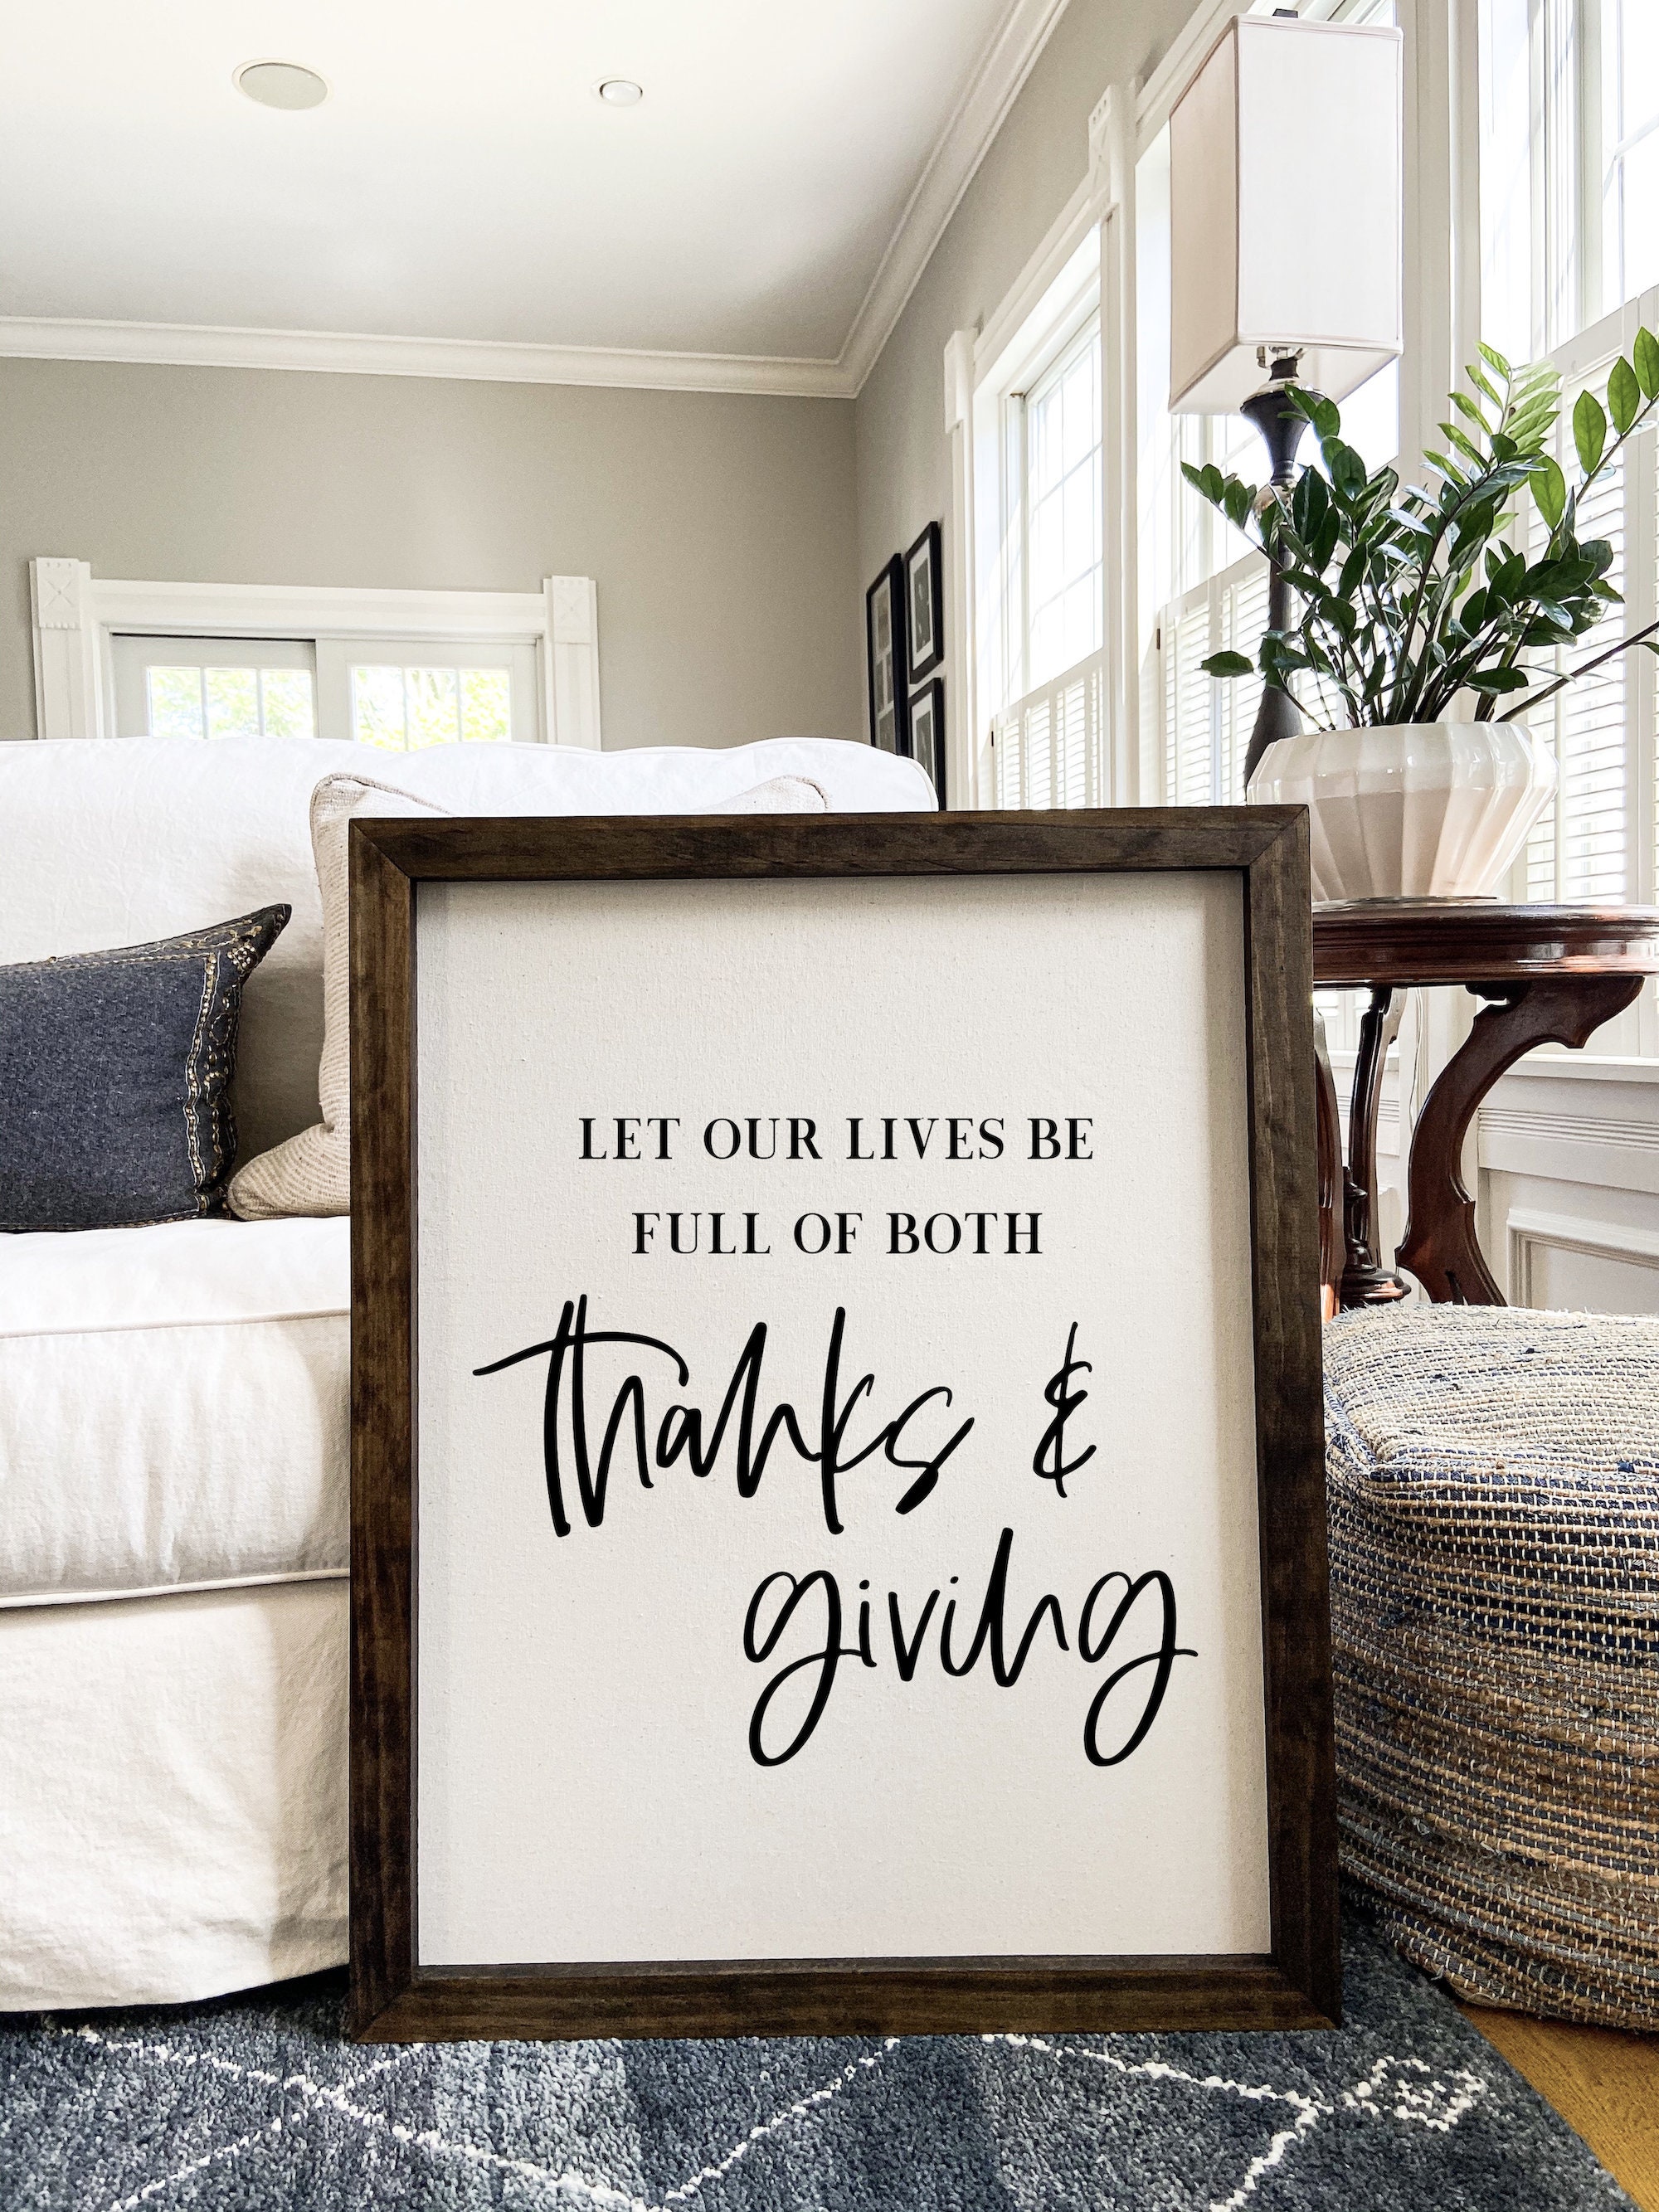 Let our lives be full of both thanks and giving thanksgiving | Etsy